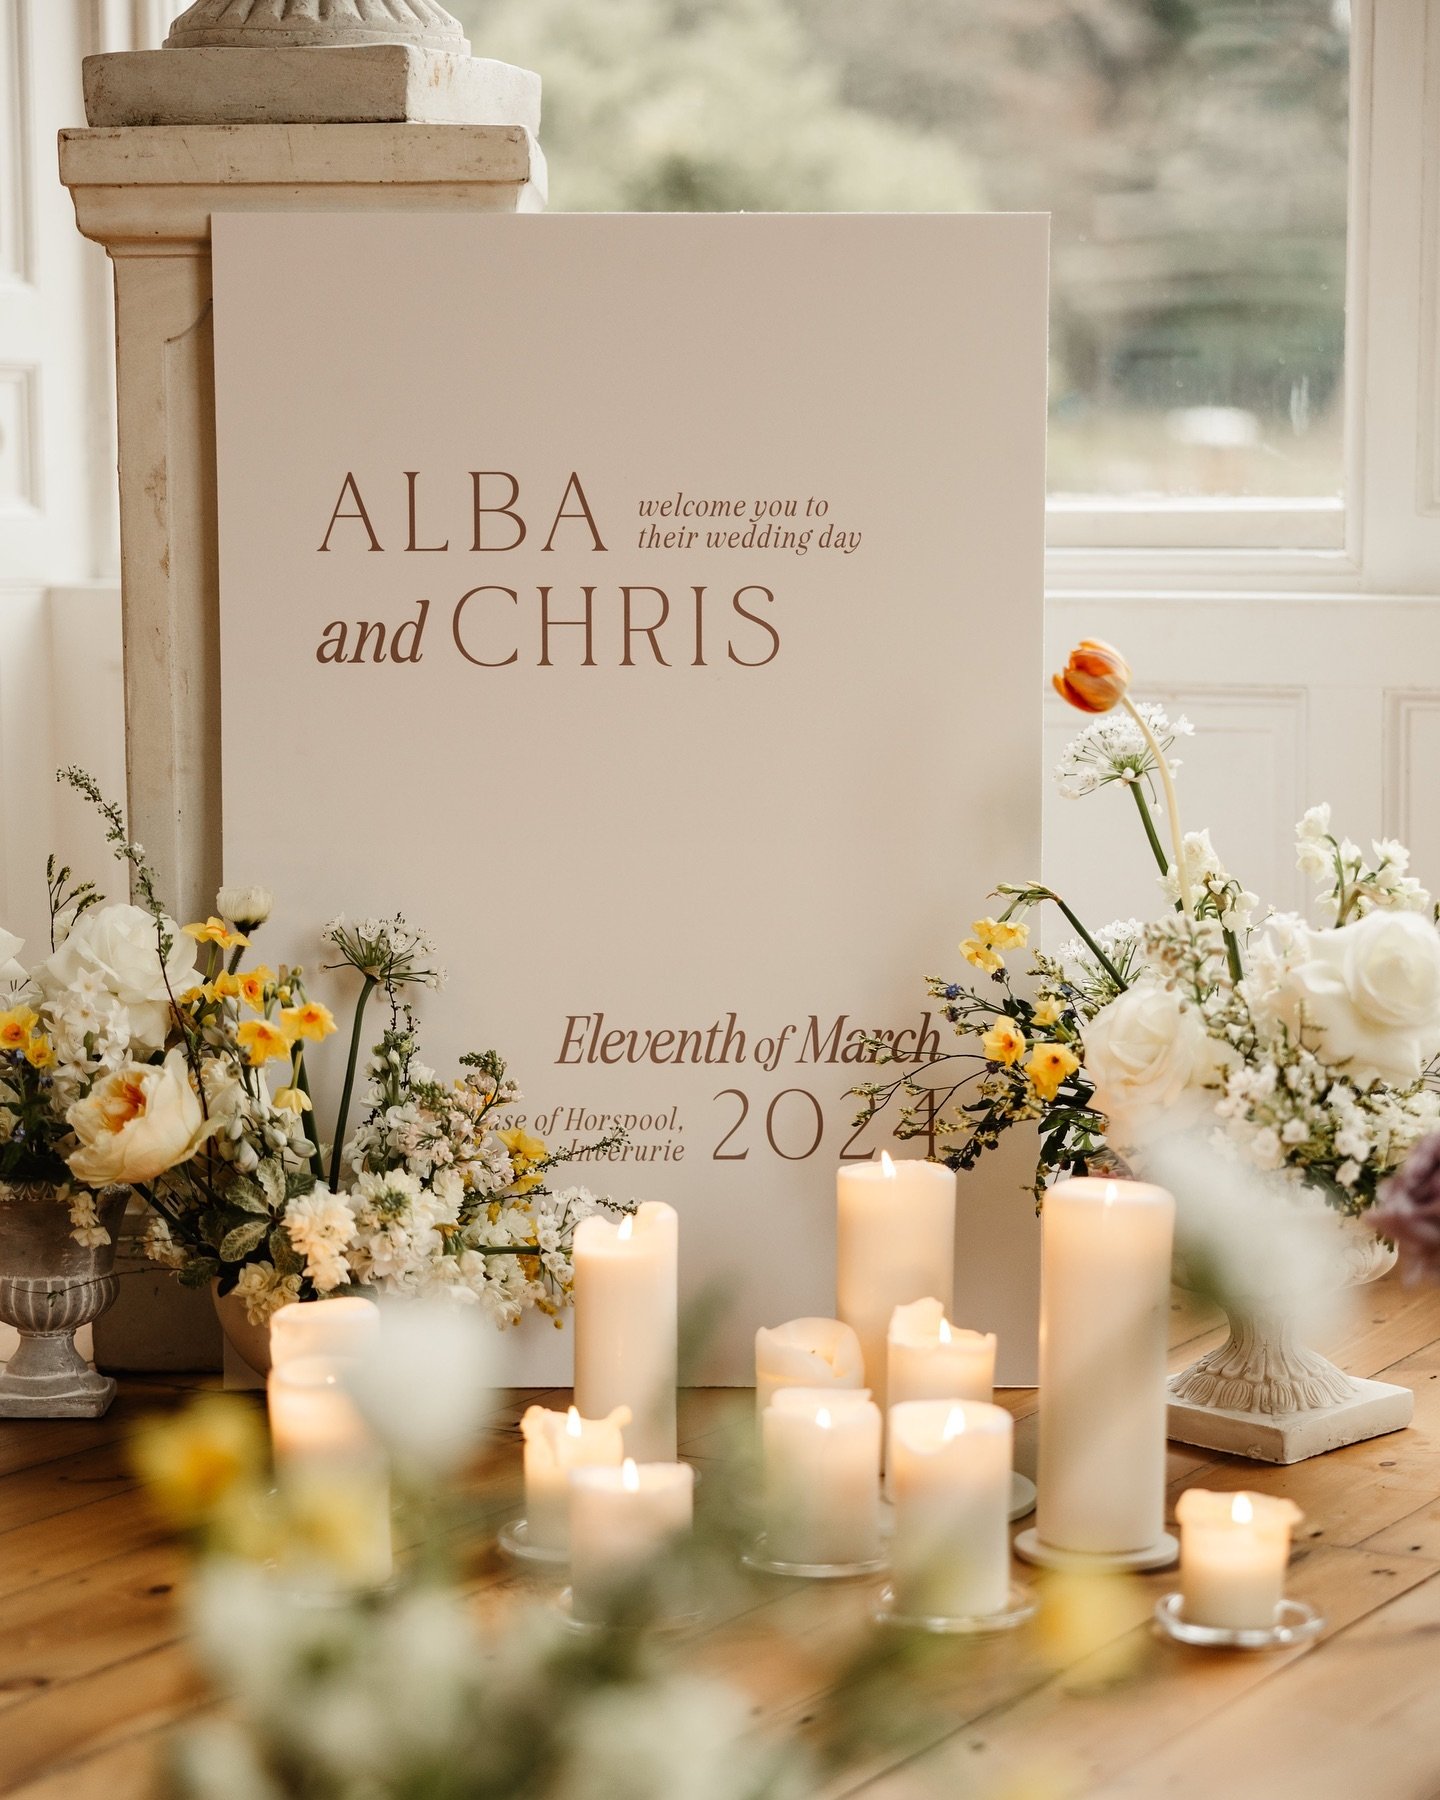 So in love with this set up at Aberdeenshire&rsquo;s newest wedding venue 🌼

Styling &amp; florals @kimdalglishflorist 
Photography @emmalawsonphoto 
Venue @houseofhorspool 
Stationery &amp; Signage @lovepaperco 

#weddingstationery #weddinginvitati